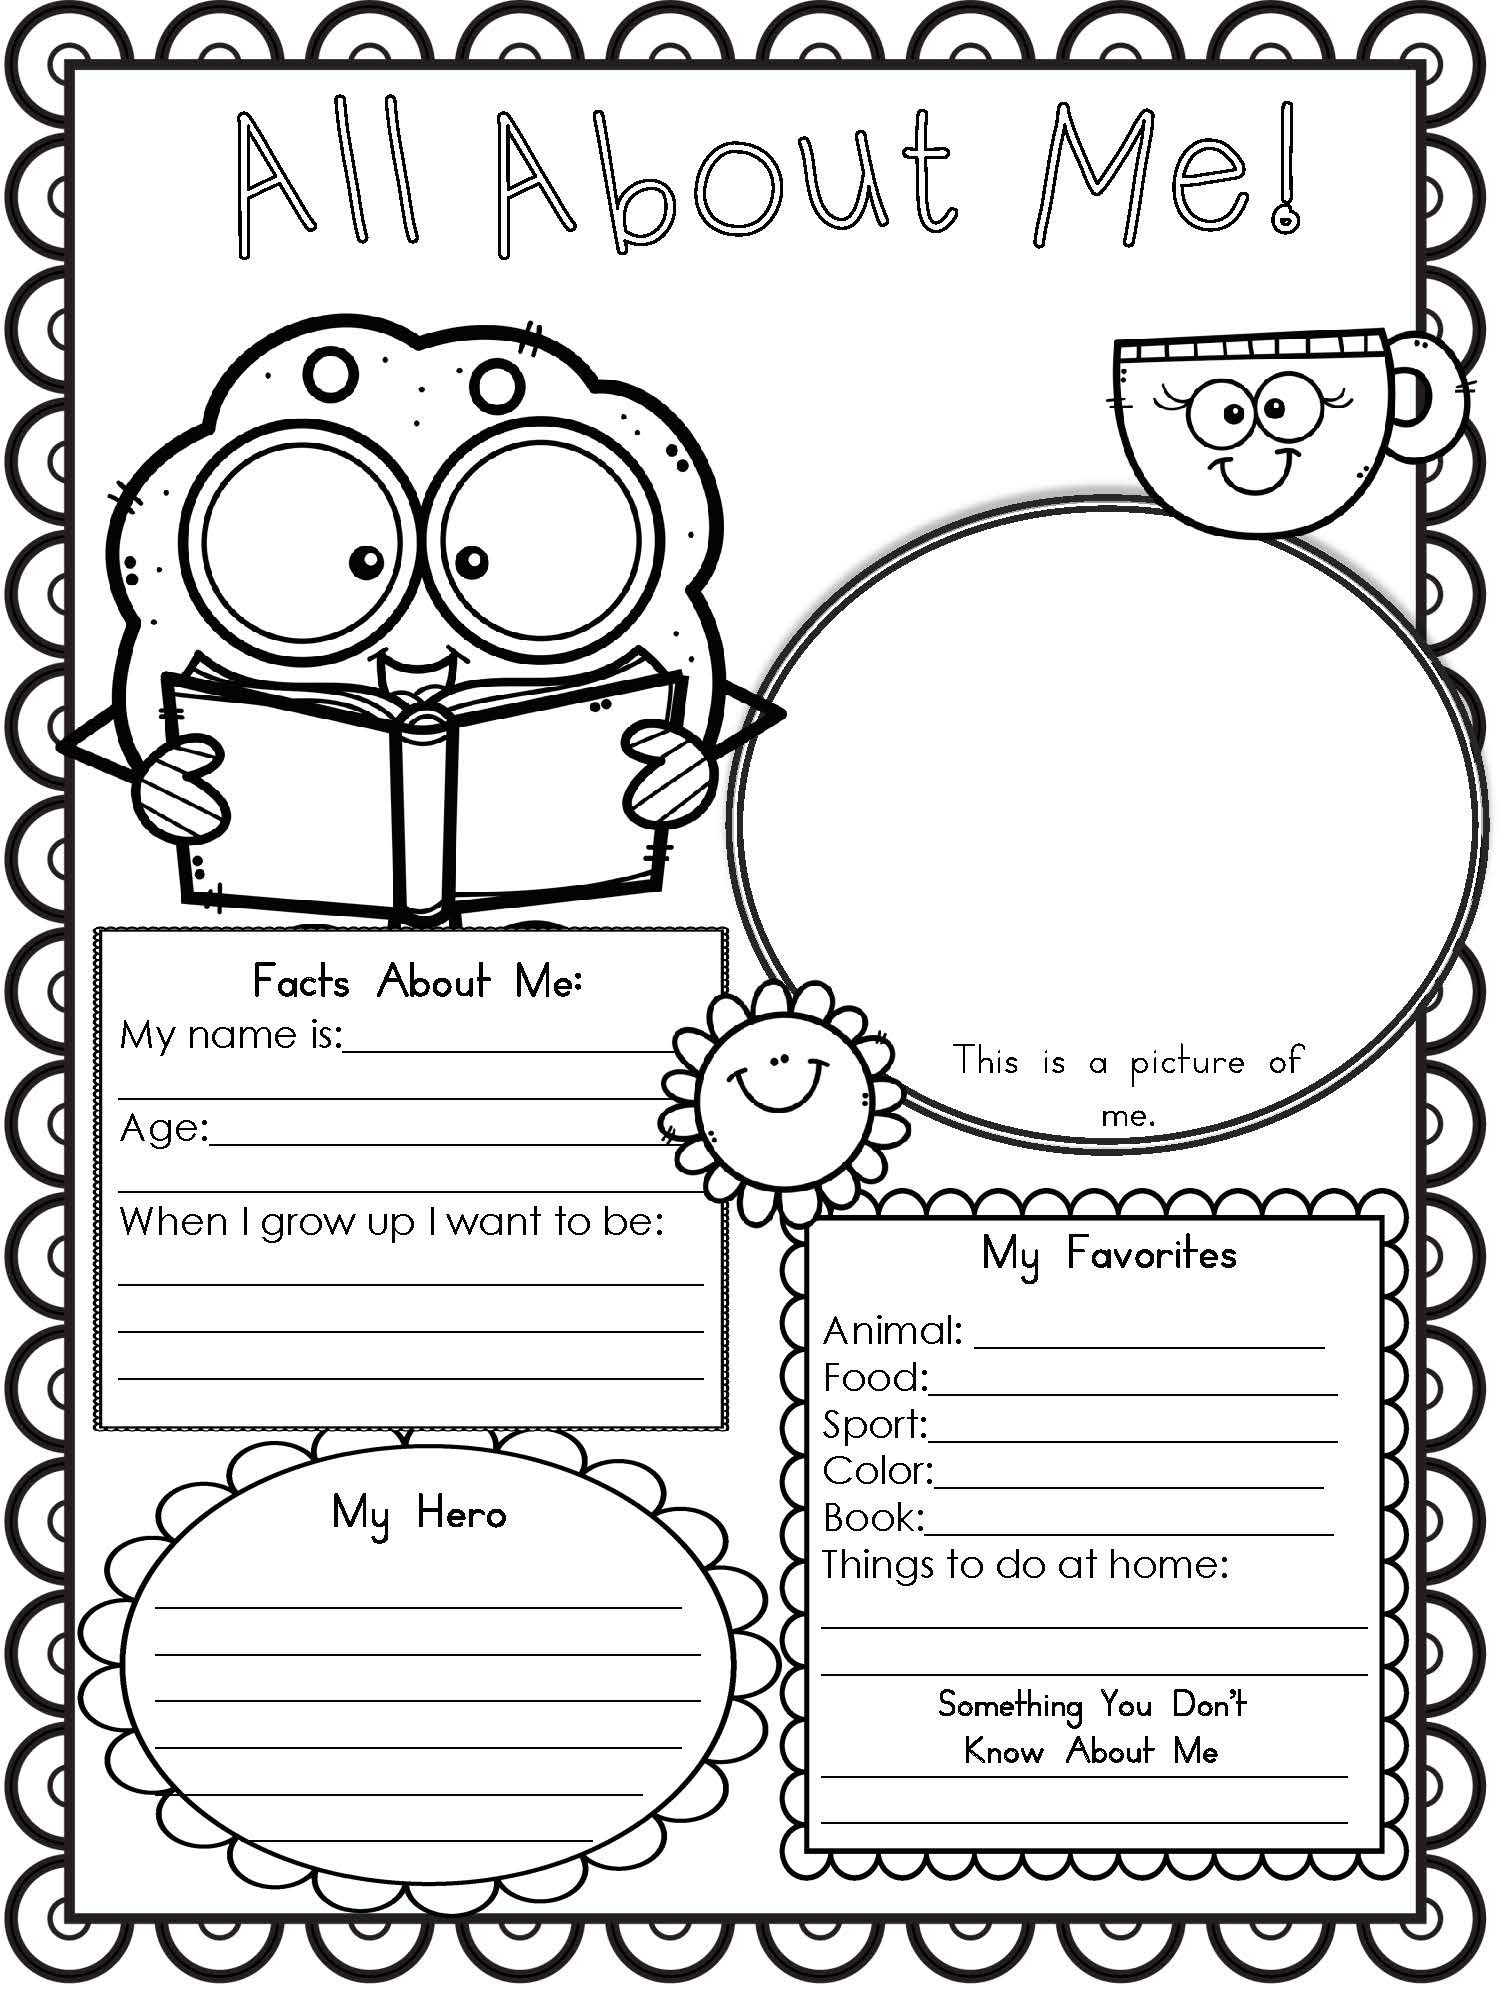 All About Me Worksheet Middle School Pdf Db excel